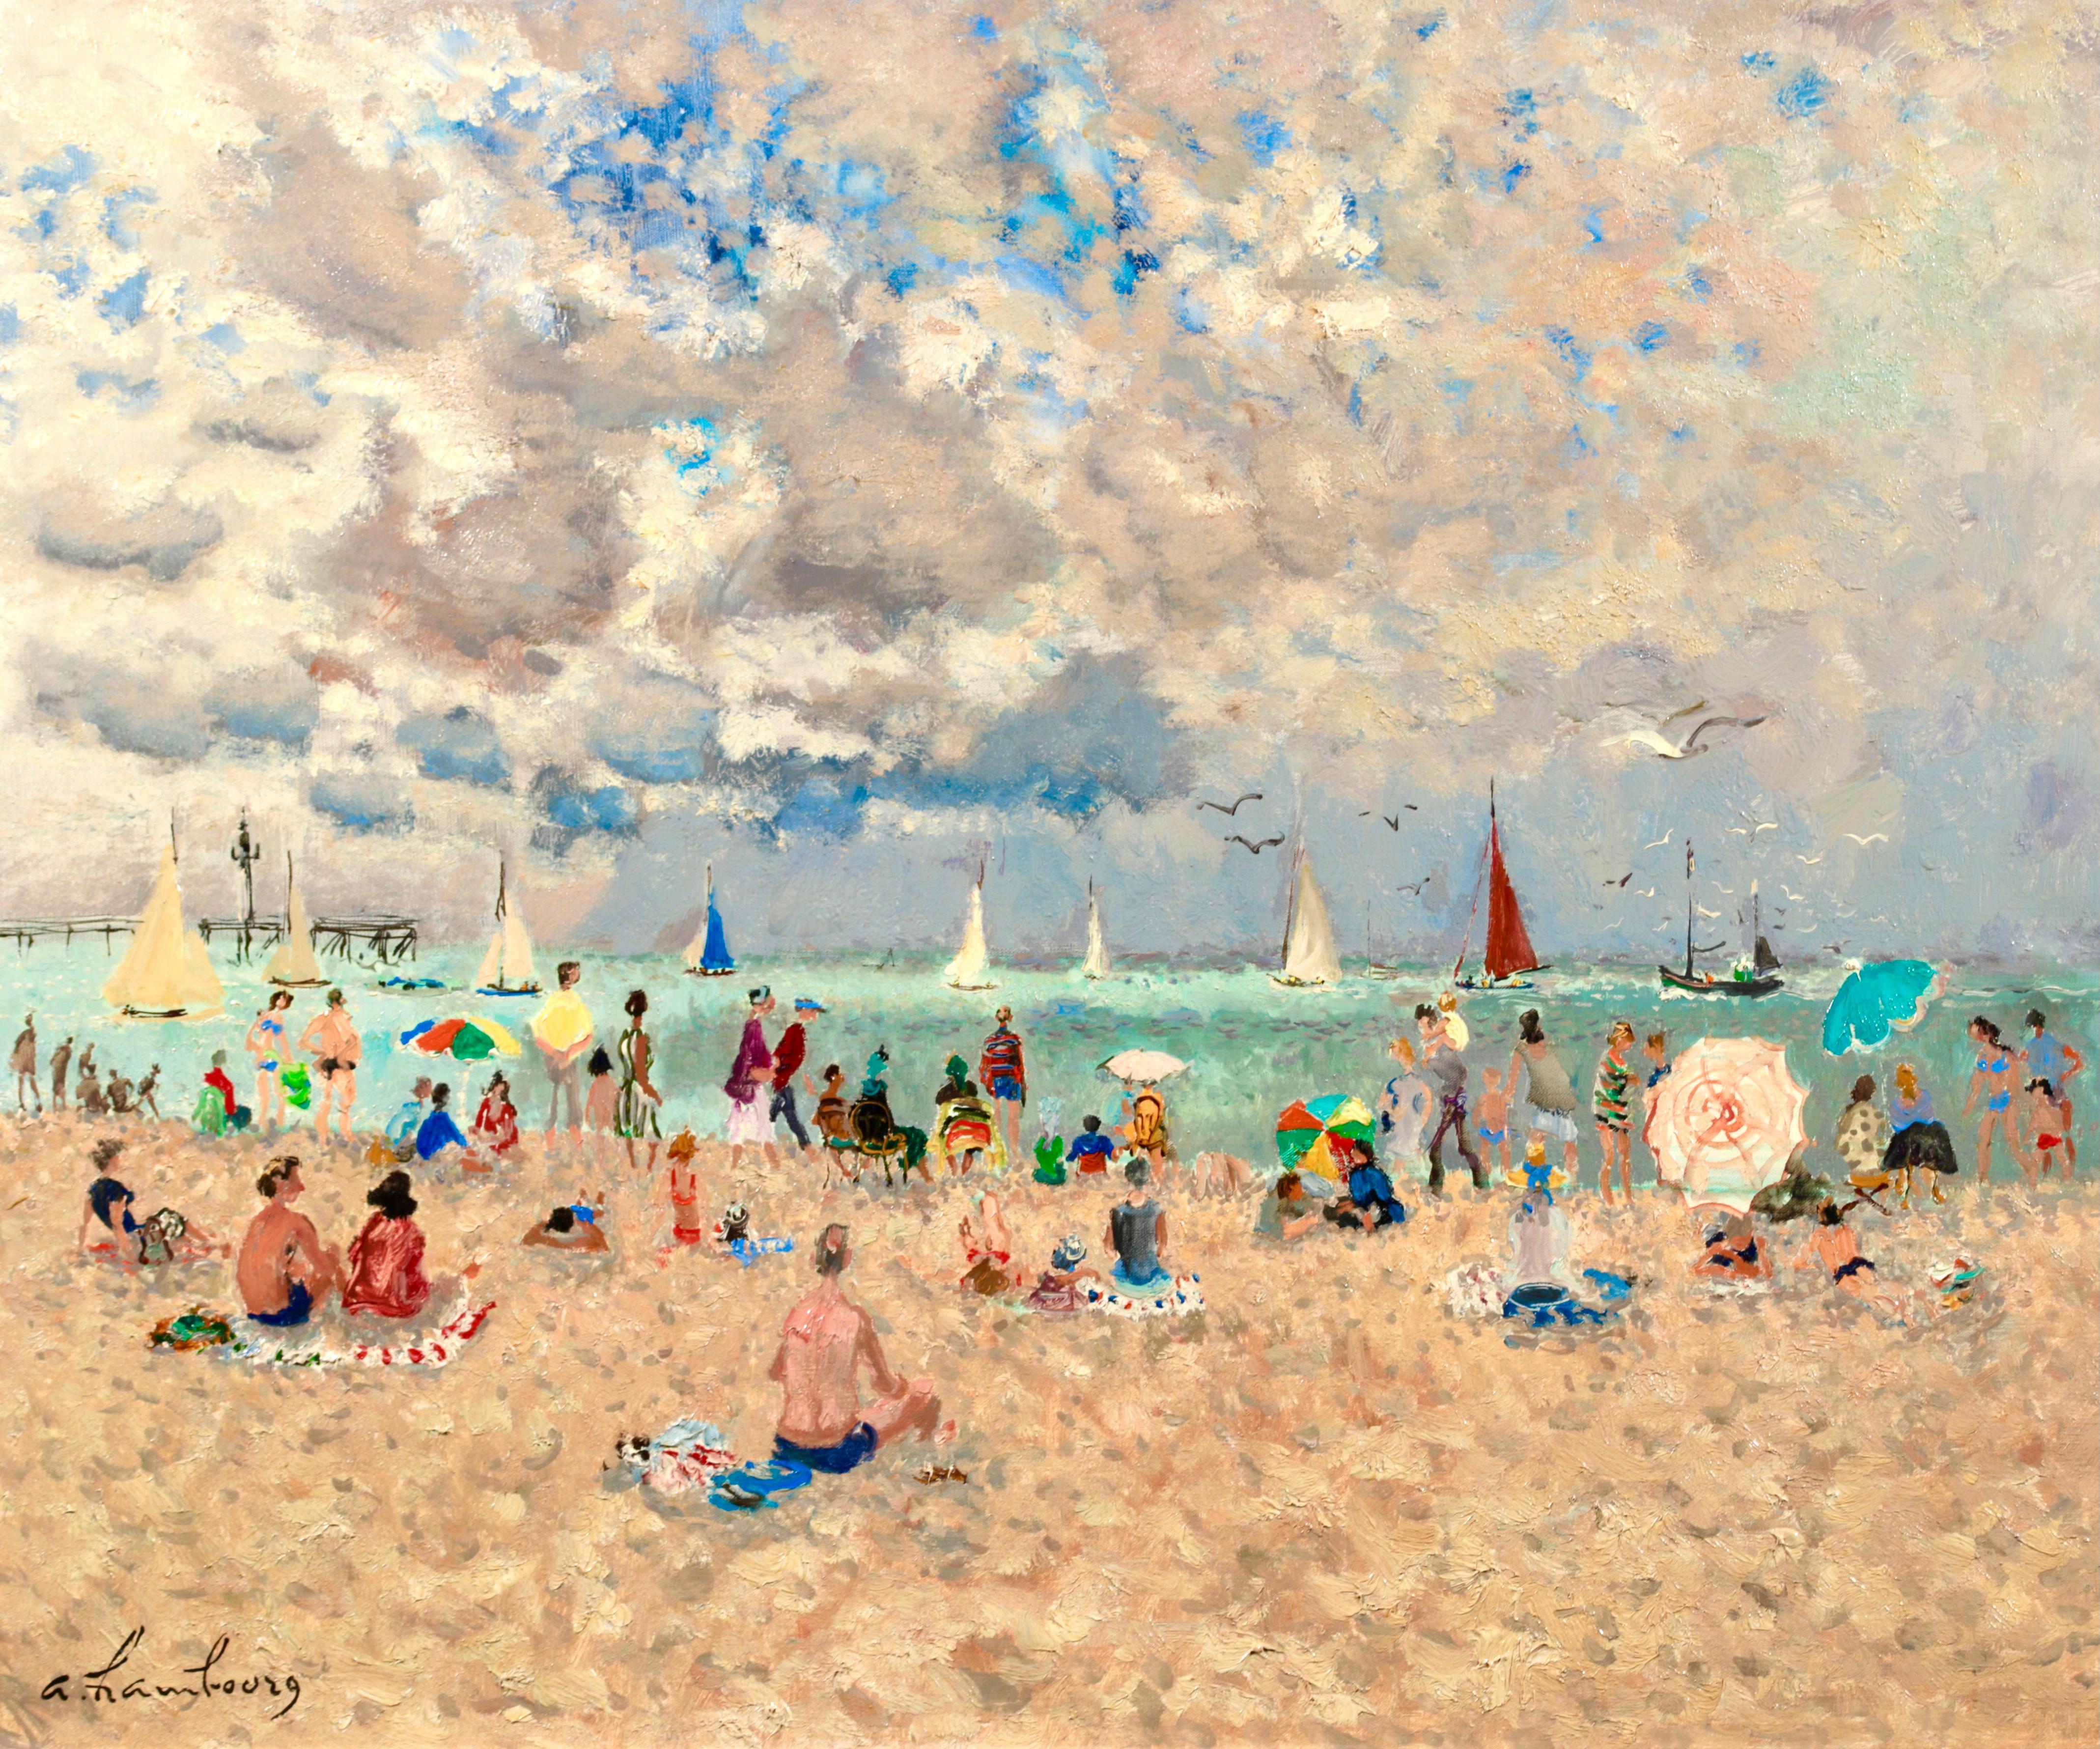 Signed figures in a seascape oil on canvas circa 1950 by French modernist painter Andre Hambourg. This beautiful piece depicts families enjoying a day out at the seaside - bathers rest on the golden sand of the beach in Deauville, France, while the